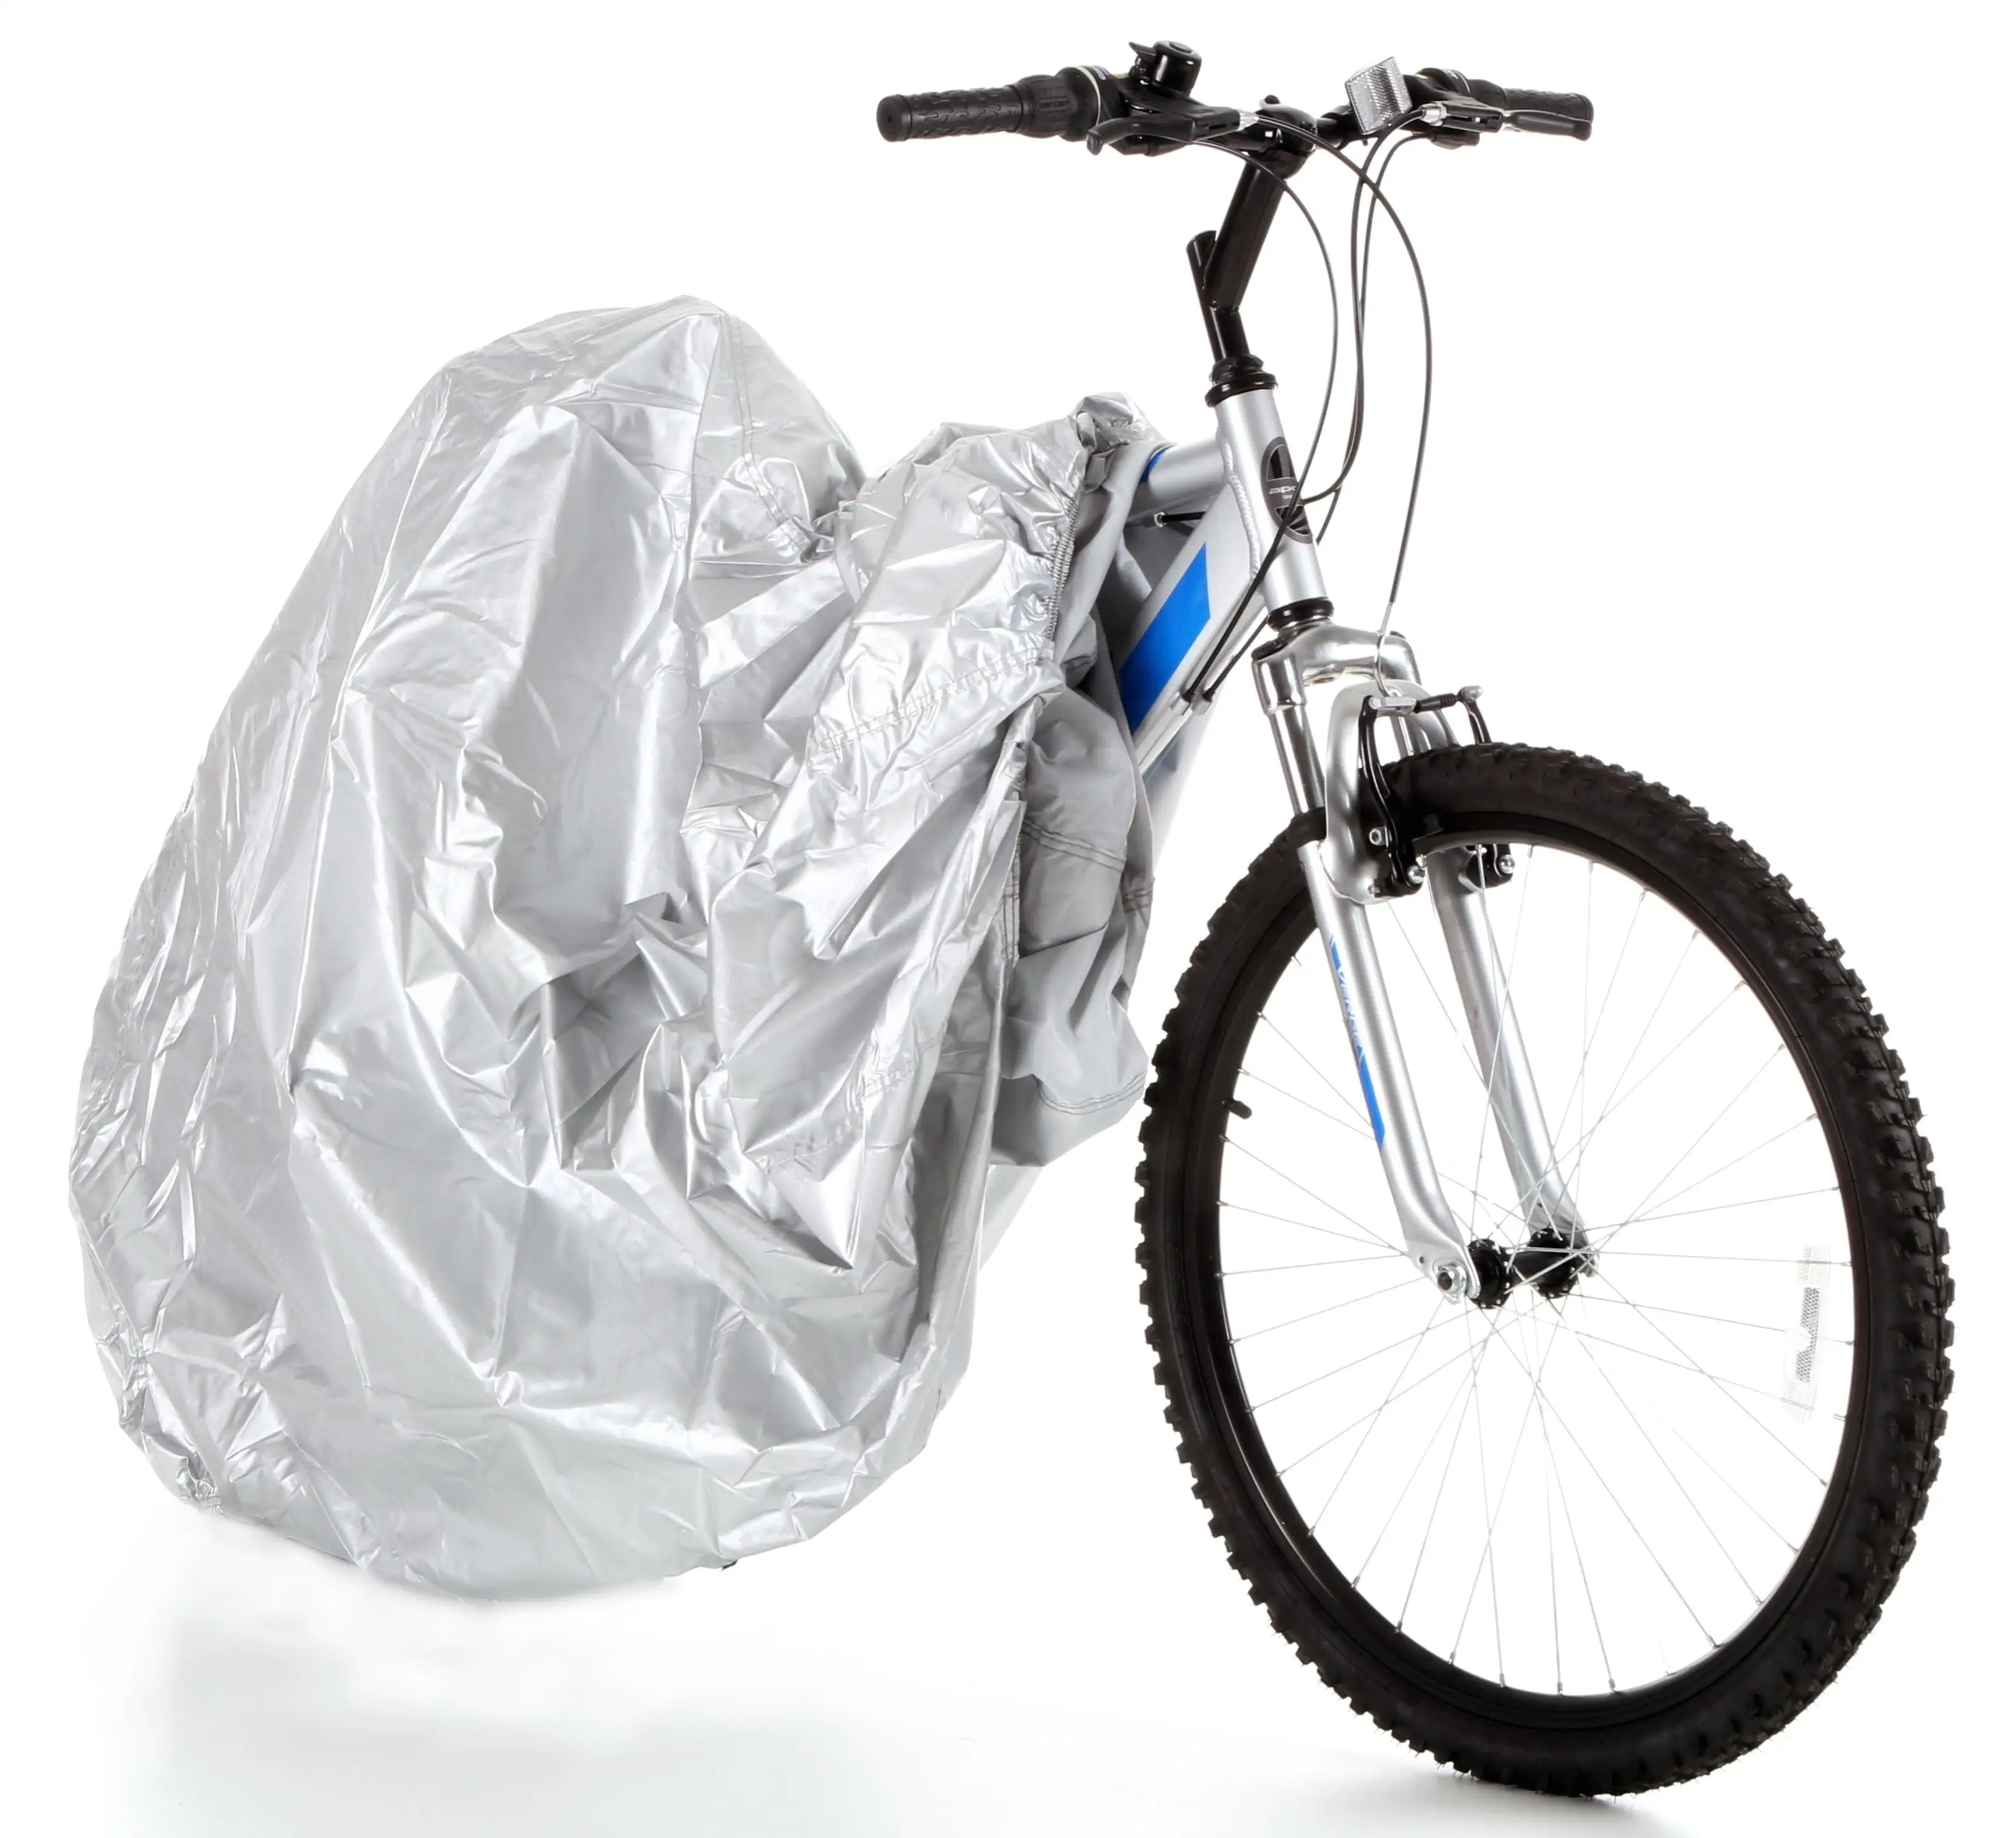 all weather bike cover